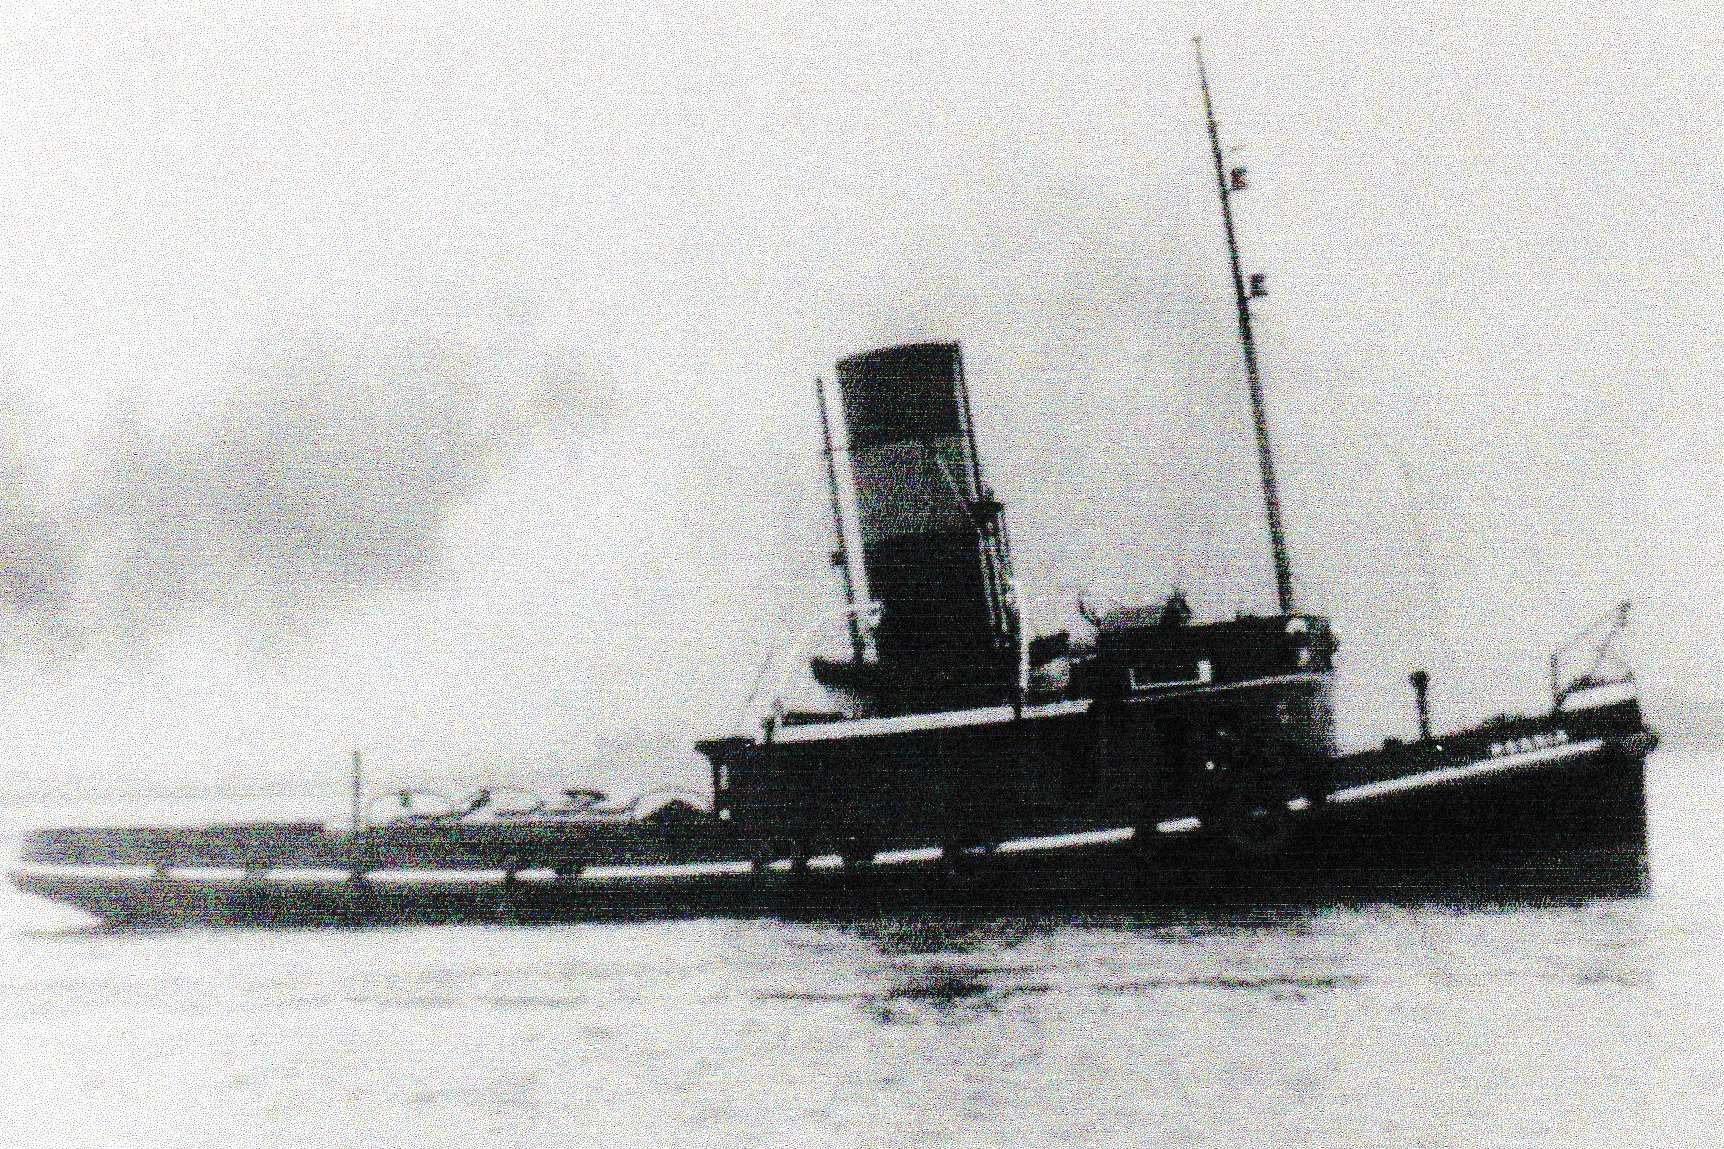 Tug Persia, which sunk with the loss of the crew